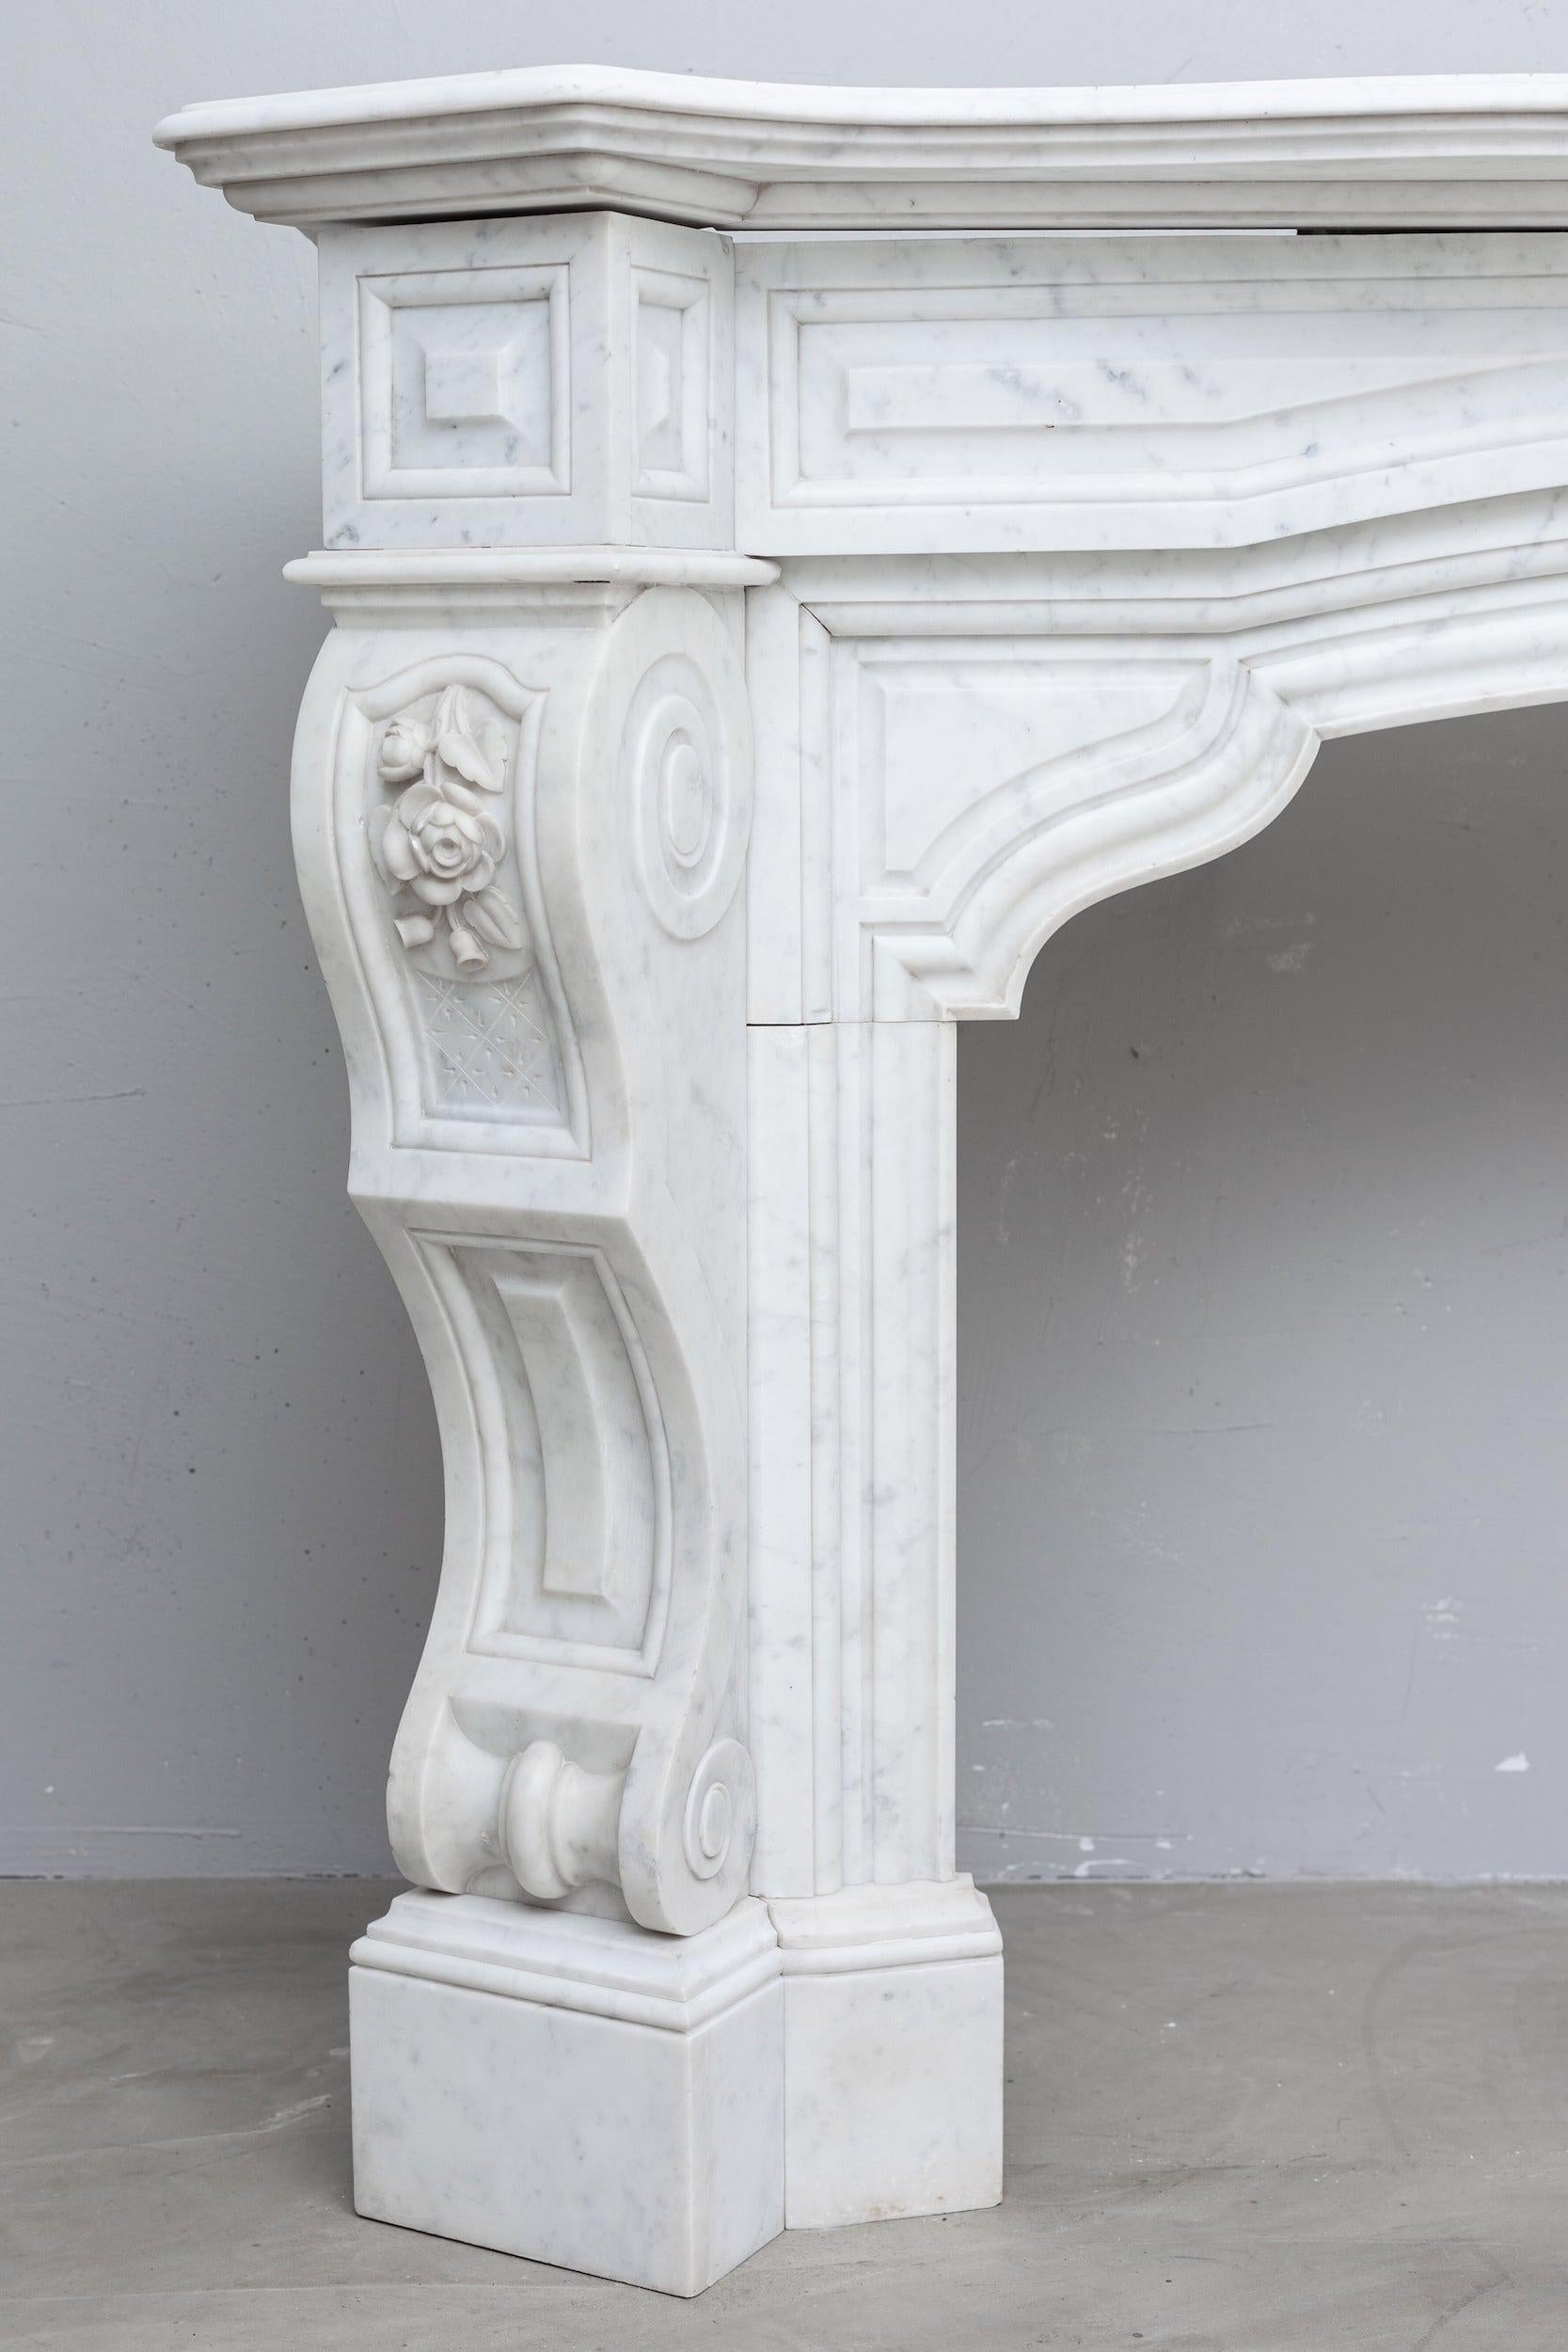 This beautiful antique surround fireplace is made from luxurious Carrara marble. Richly inlaid with ornate details and a centerpiece where the characteristic “scallop” makes its entrance.
Thanks to a wide, double profiled top, the contours of this